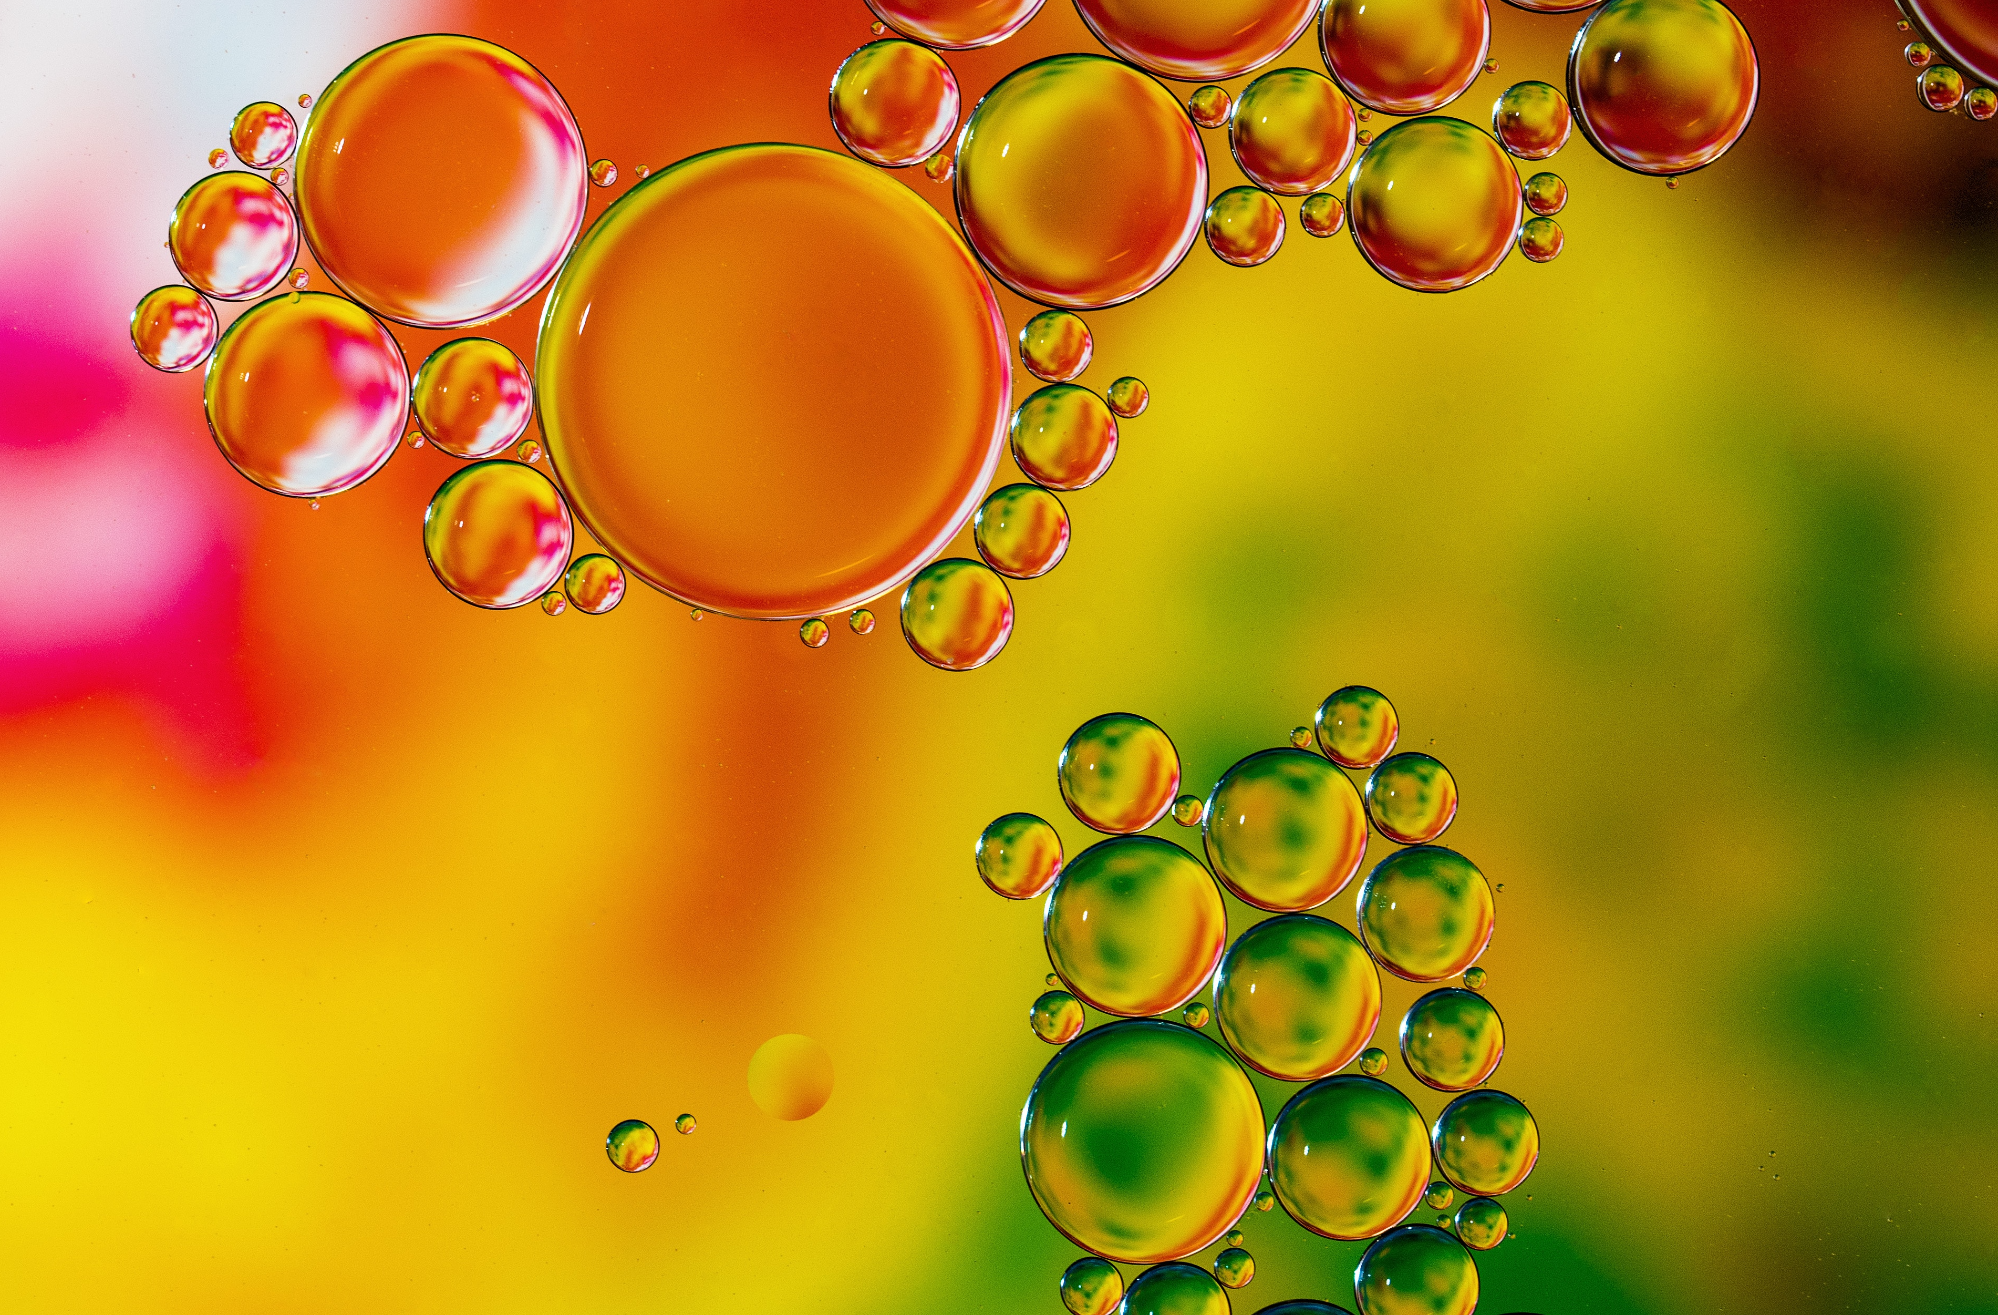 An image of oil droplets